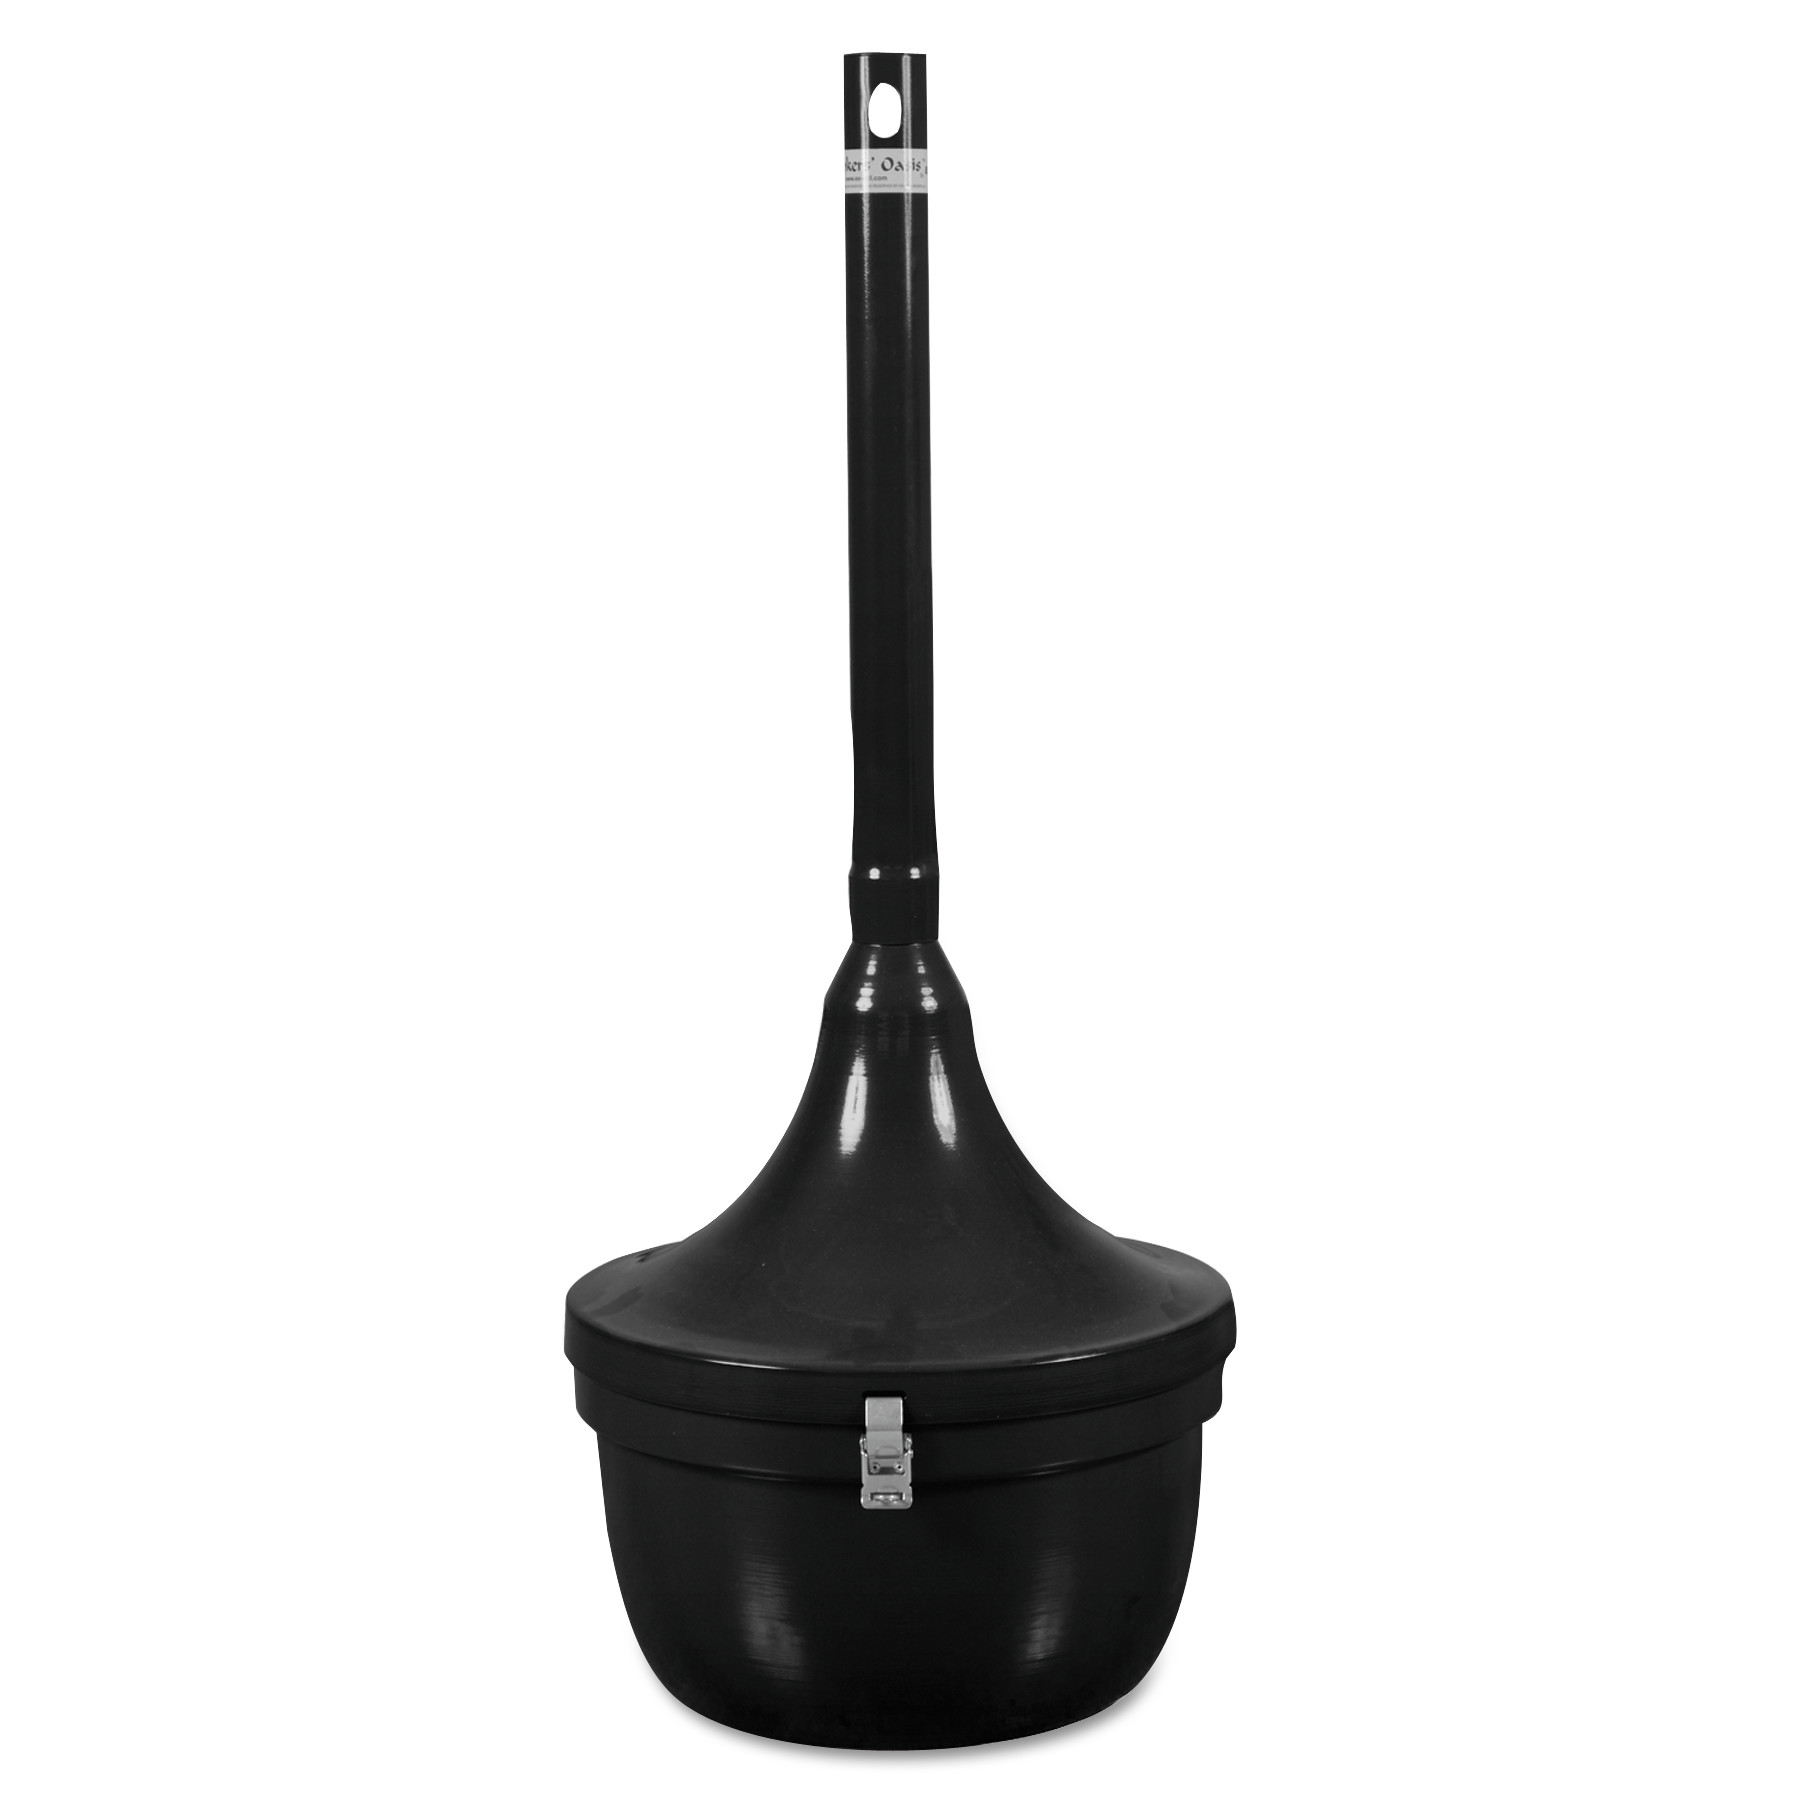  Ex-Cell SRS-1 BLK Smokers' Oasis Receptacle, Round, Steel, 4.5 gal, Black (EXCSRS1BLK) 